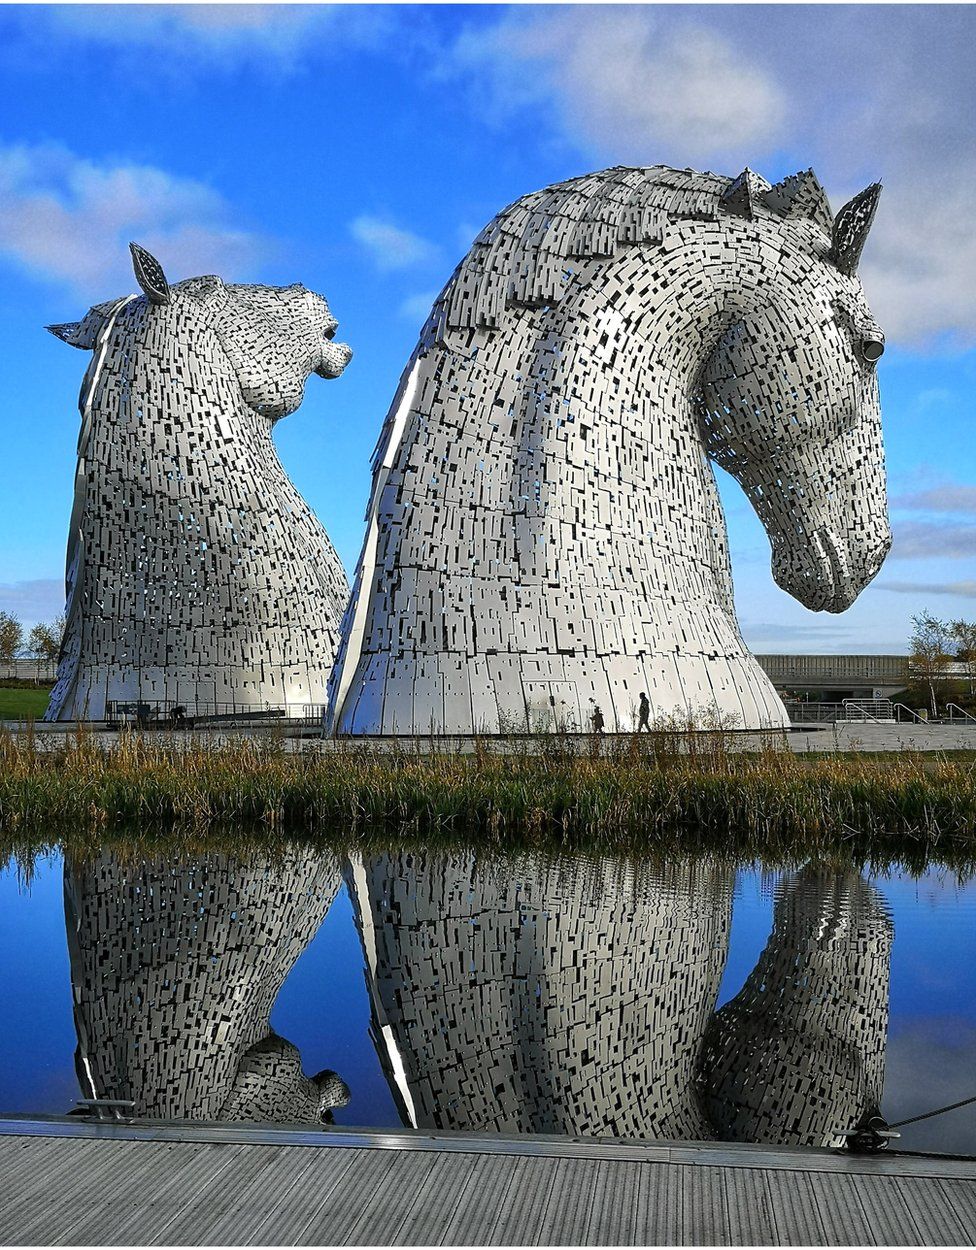 The Kelpies and their reflection in the canal water below.